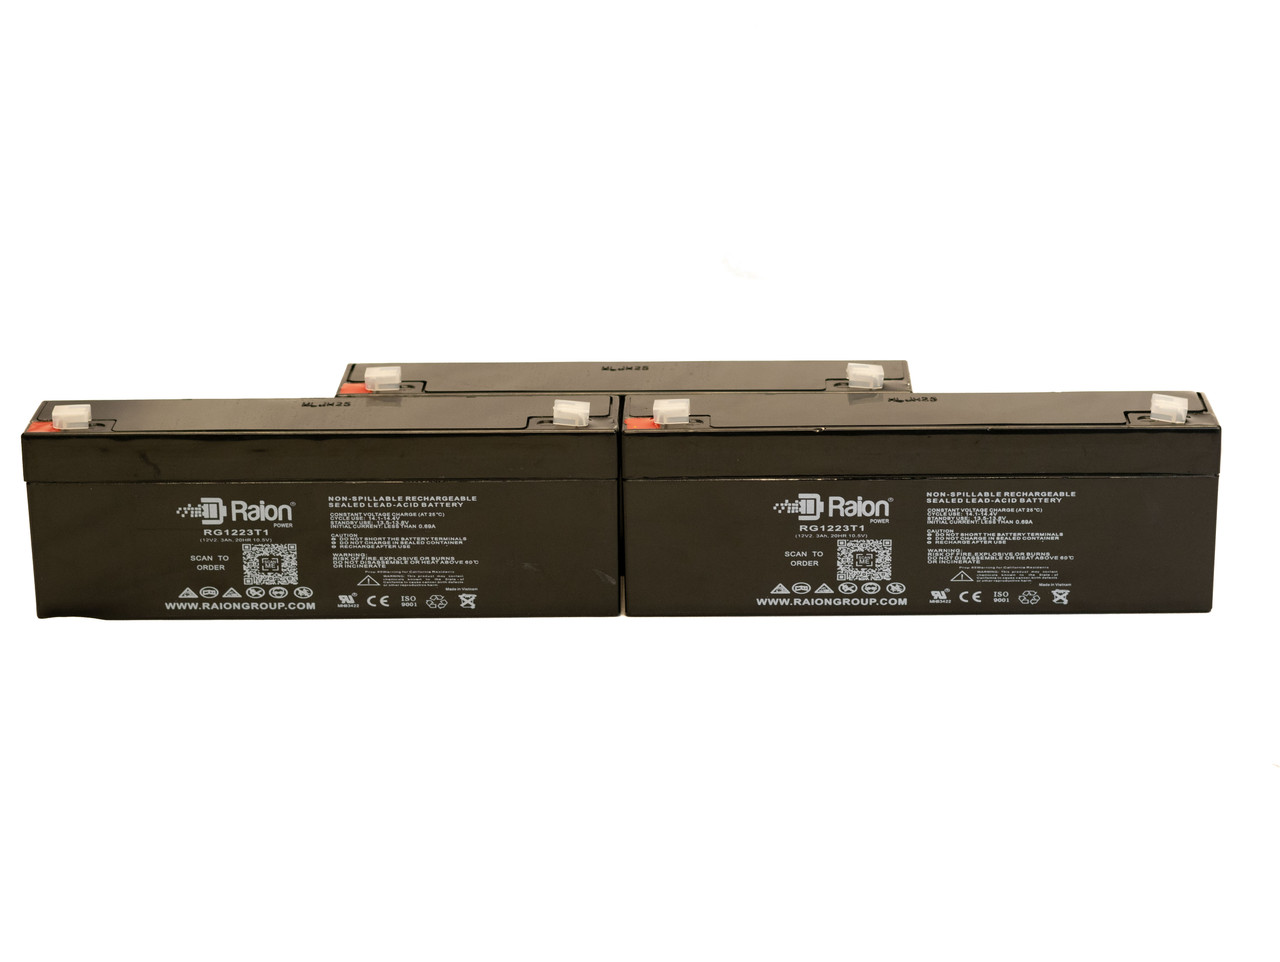 Raion Power 12V 2.3Ah RG1223T1 Replacement Medical Battery for Zimmer Medical ATS 1500 - 3 Pack